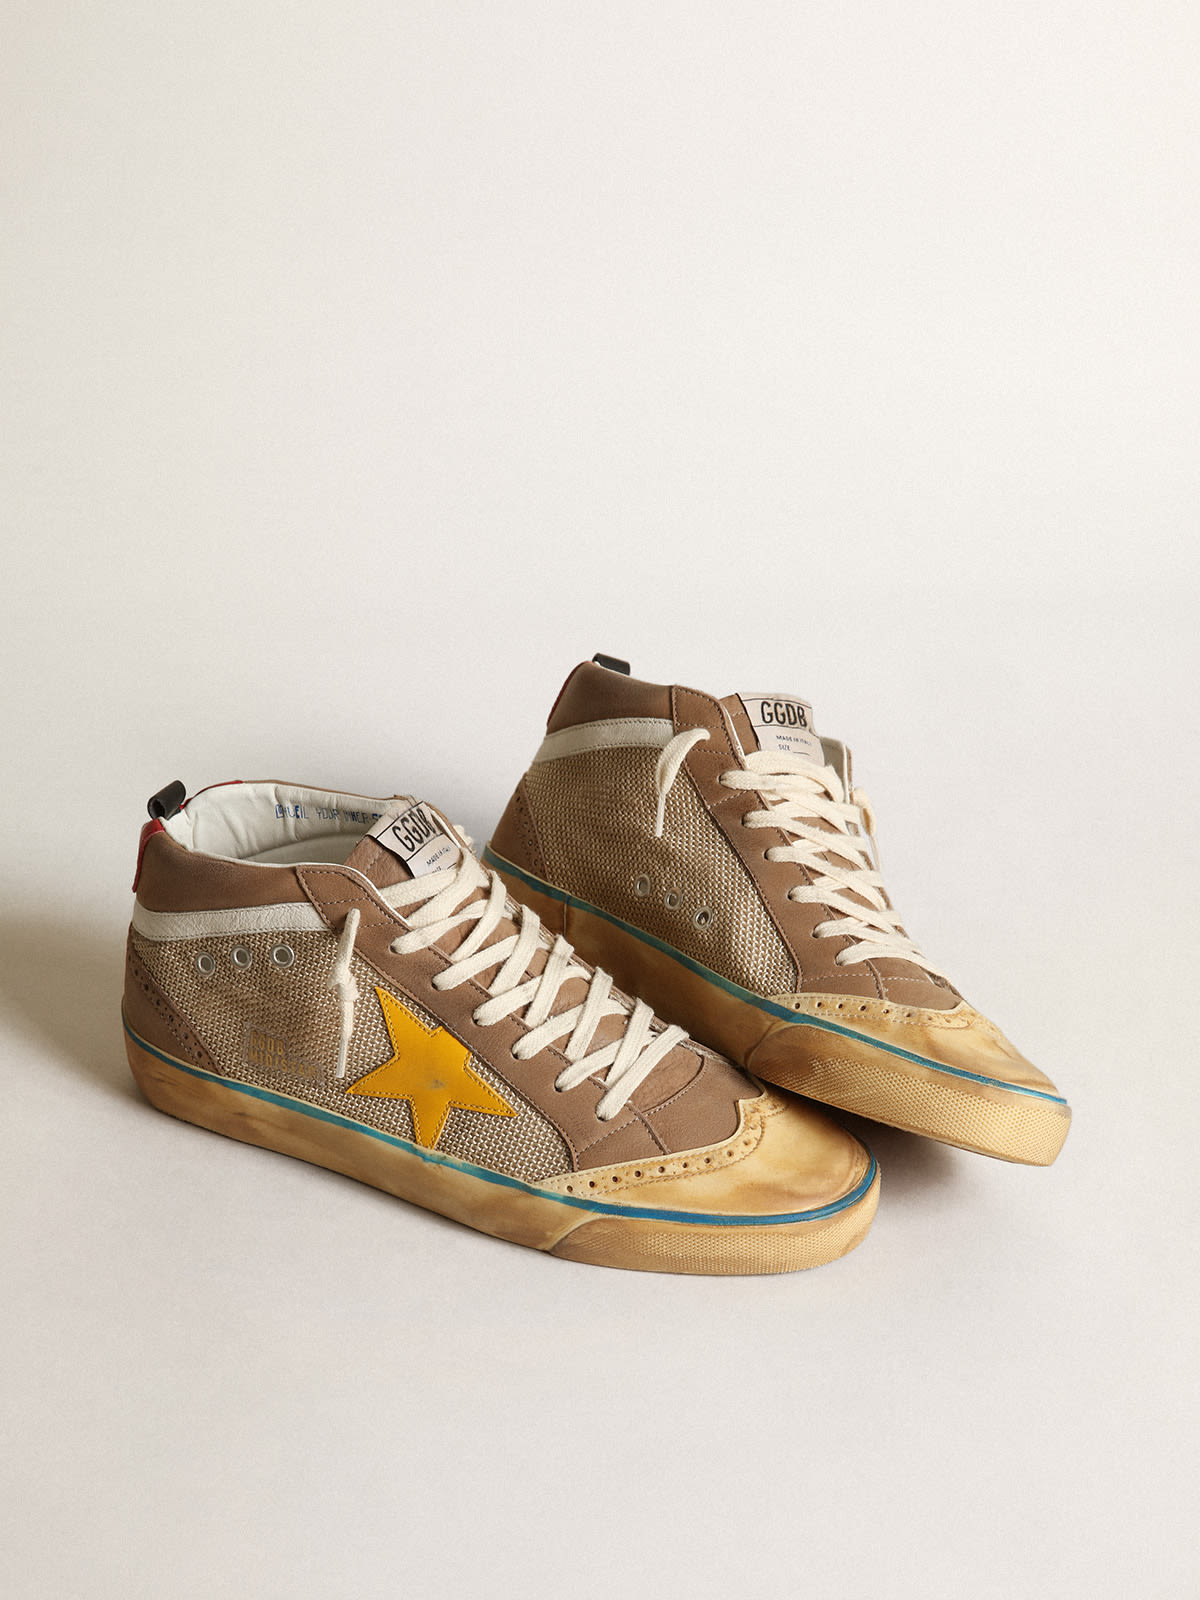 Golden Goose - Mid Star sneakers in beige mesh and dove-gray nubuck with yellow leather star in 